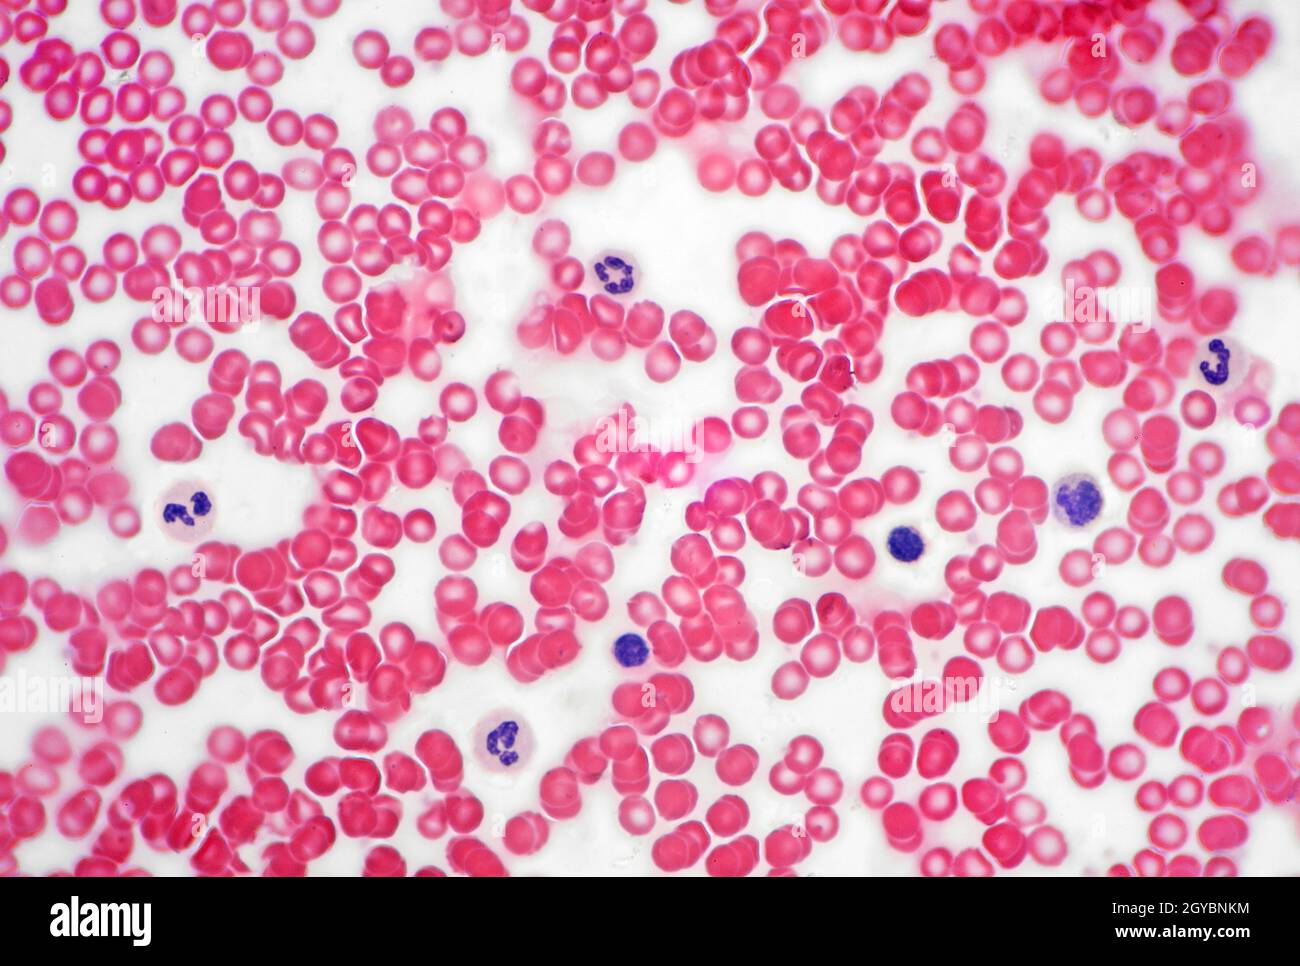 Human blood cells, stained brightfield photomicrograph Stock Photo